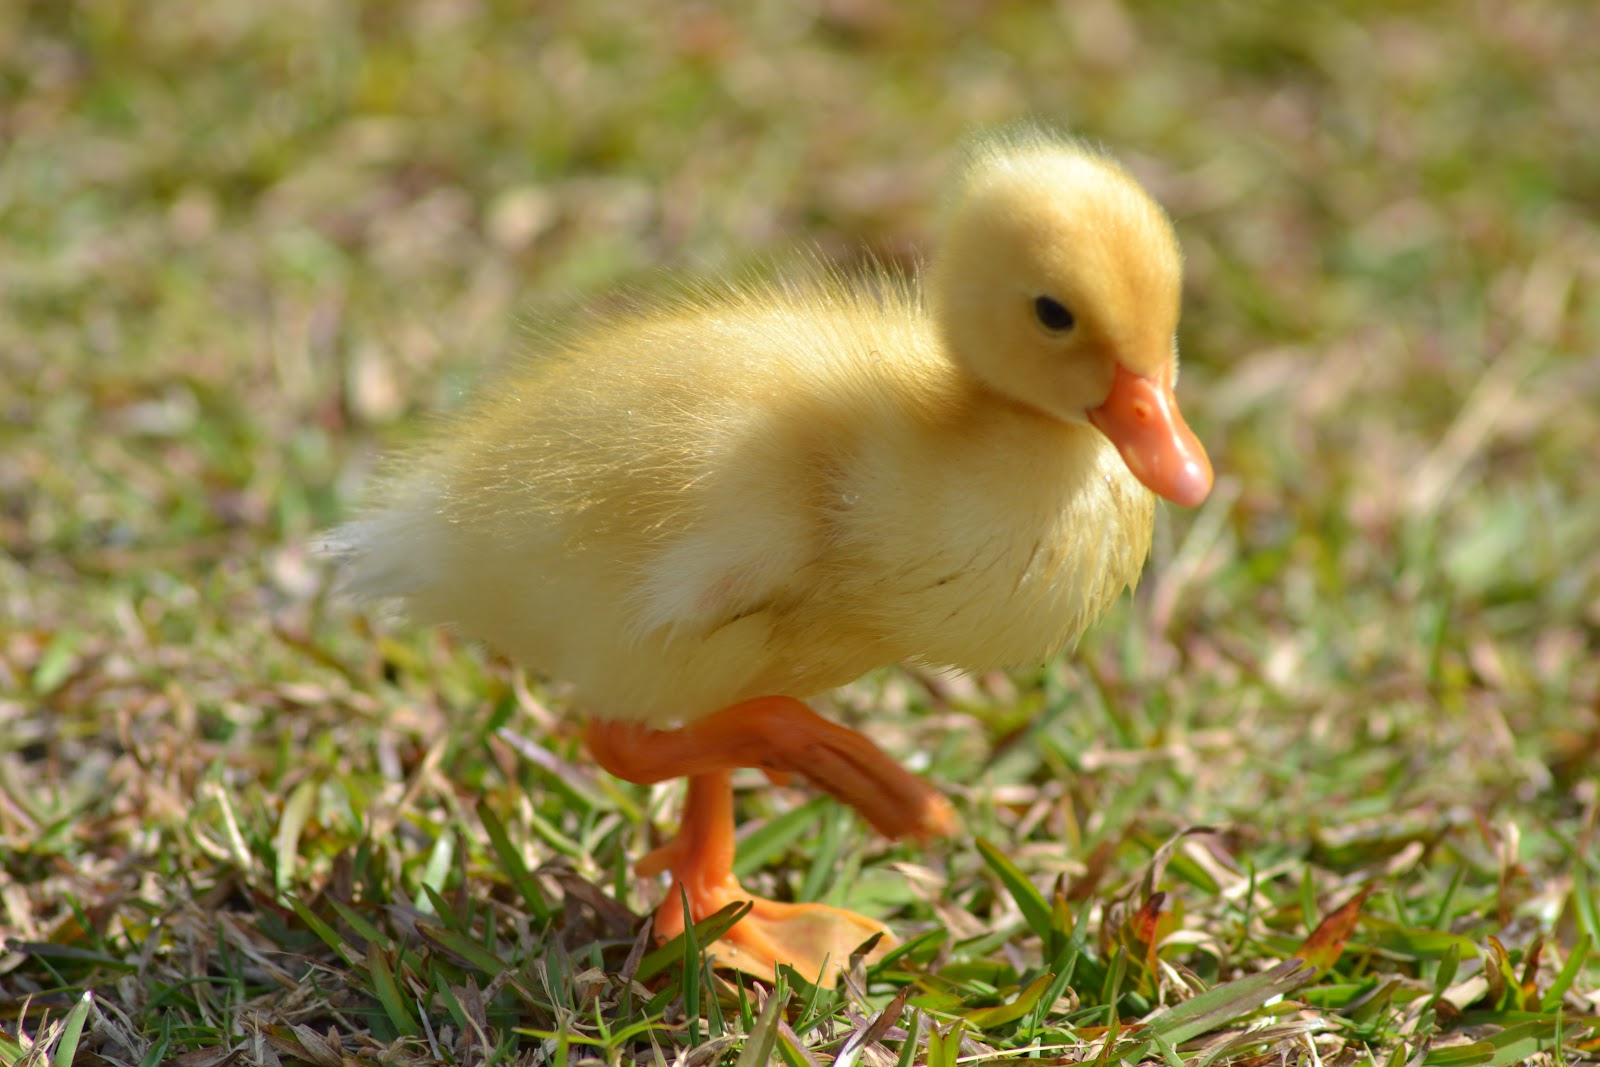 TheA+ Photography: Fluffy Duck